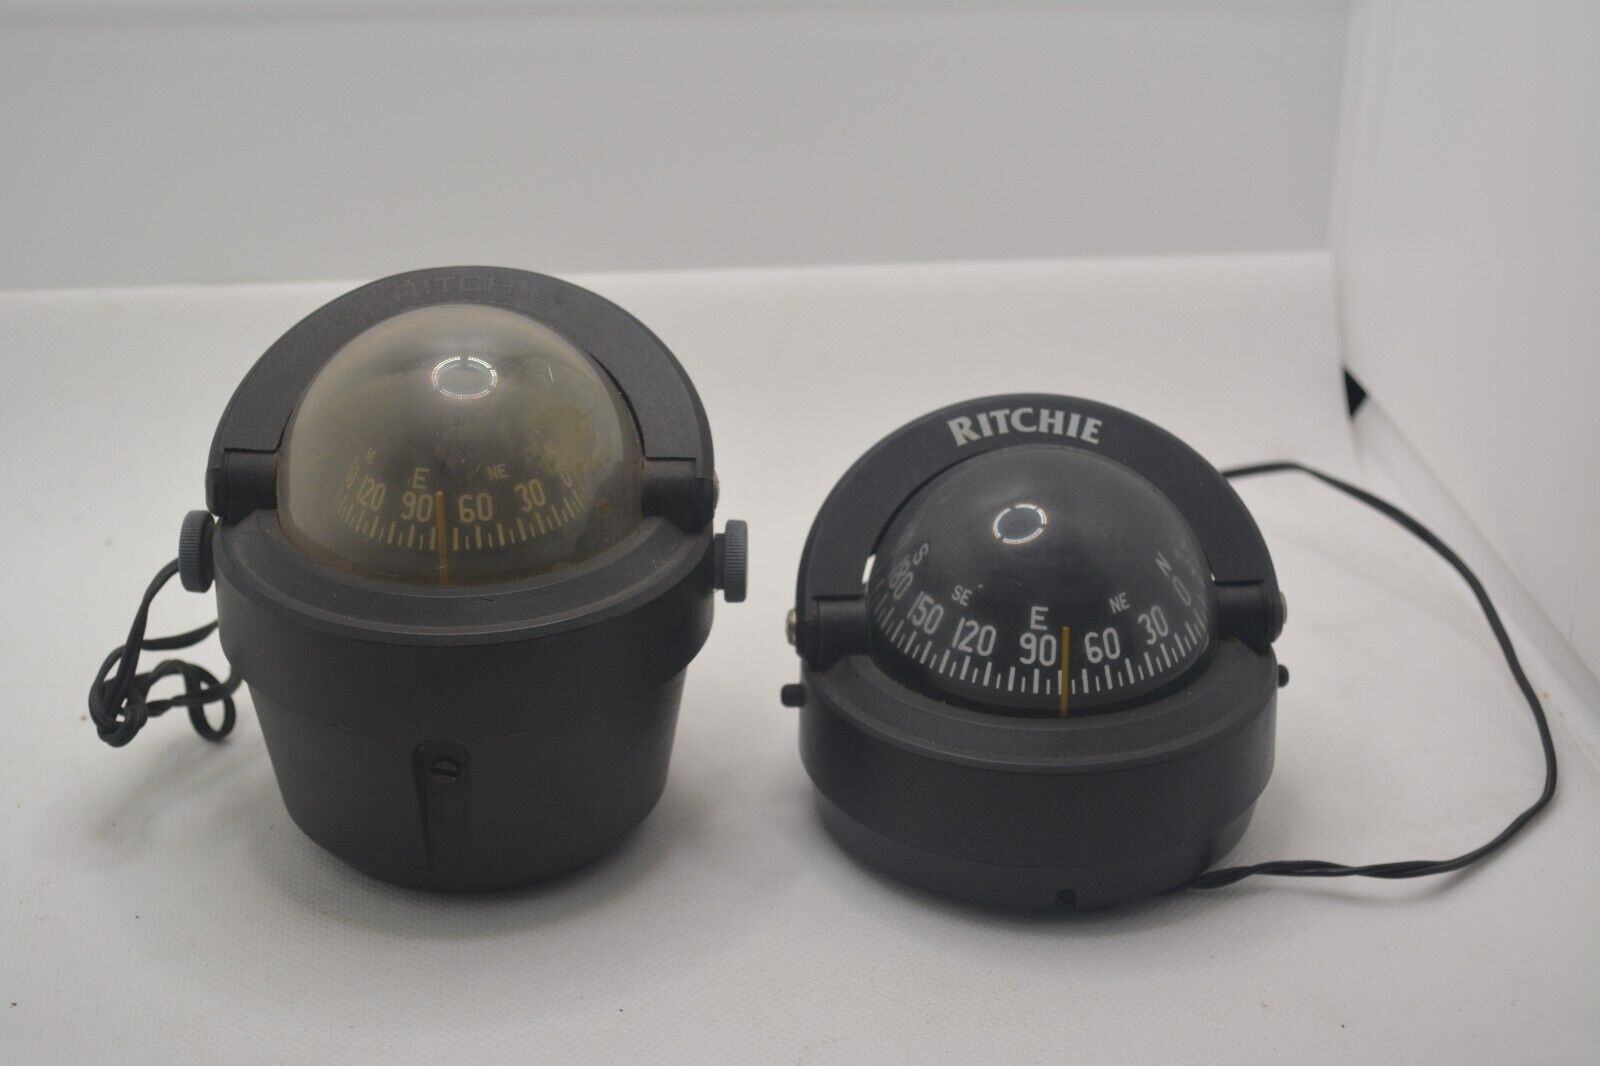 Lot of 2 Ritchie Boat Compass Navigation B-51 & Unknown Model Black Dial